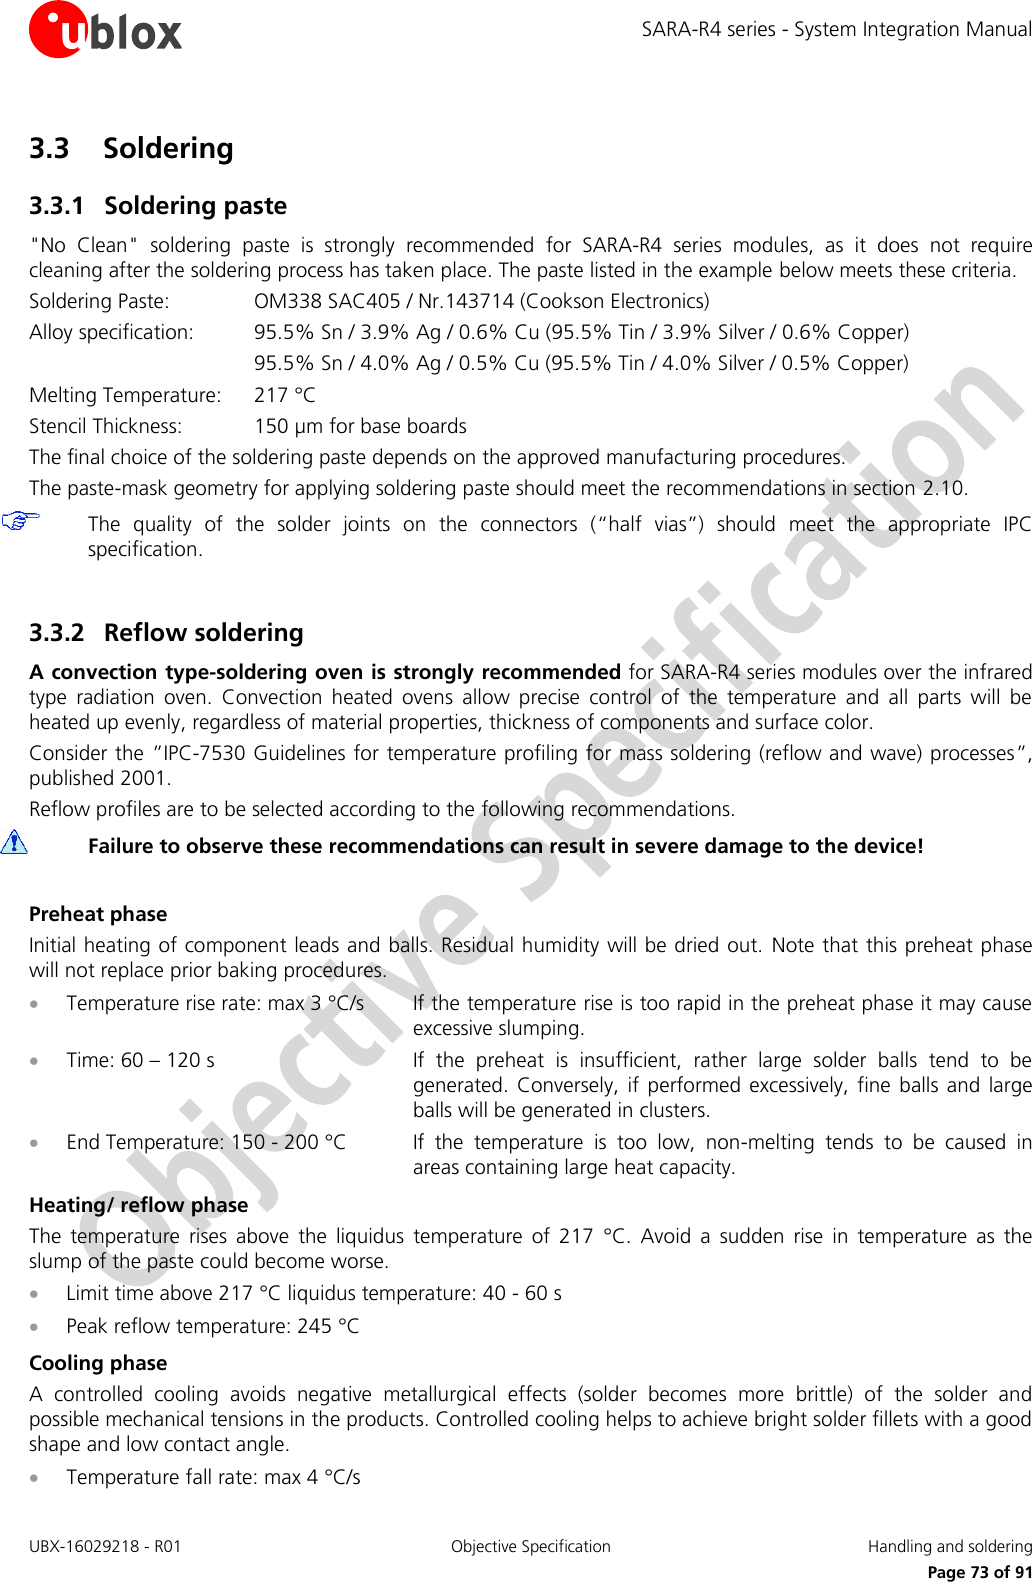 SARA-R4 series - System Integration Manual UBX-16029218 - R01  Objective Specification  Handling and soldering     Page 73 of 91 3.3 Soldering 3.3.1 Soldering paste &quot;No  Clean&quot;  soldering  paste  is  strongly  recommended  for  SARA-R4  series  modules,  as  it  does  not  require cleaning after the soldering process has taken place. The paste listed in the example below meets these criteria. Soldering Paste:    OM338 SAC405 / Nr.143714 (Cookson Electronics) Alloy specification:  95.5% Sn / 3.9% Ag / 0.6% Cu (95.5% Tin / 3.9% Silver / 0.6% Copper)       95.5% Sn / 4.0% Ag / 0.5% Cu (95.5% Tin / 4.0% Silver / 0.5% Copper) Melting Temperature:   217 °C Stencil Thickness:  150 µm for base boards The final choice of the soldering paste depends on the approved manufacturing procedures. The paste-mask geometry for applying soldering paste should meet the recommendations in section 2.10.  The  quality  of  the  solder  joints  on  the  connectors  (“half  vias”)  should  meet  the  appropriate  IPC specification.  3.3.2 Reflow soldering A convection type-soldering oven is strongly recommended for SARA-R4 series modules over the infrared type  radiation  oven.  Convection  heated  ovens  allow  precise  control  of  the  temperature  and  all  parts  will  be heated up evenly, regardless of material properties, thickness of components and surface color. Consider the ”IPC-7530 Guidelines for temperature profiling for mass soldering (reflow and wave) processes”, published 2001. Reflow profiles are to be selected according to the following recommendations.  Failure to observe these recommendations can result in severe damage to the device!  Preheat phase Initial heating of component leads and balls. Residual humidity will be dried out.  Note that this preheat phase will not replace prior baking procedures.  Temperature rise rate: max 3 °C/s  If the temperature rise is too rapid in the preheat phase it may cause excessive slumping.  Time: 60 – 120 s  If  the  preheat  is  insufficient,  rather  large  solder  balls  tend  to  be generated.  Conversely, if  performed excessively,  fine  balls  and  large balls will be generated in clusters.  End Temperature: 150 - 200 °C  If  the  temperature  is  too  low,  non-melting  tends  to  be  caused  in areas containing large heat capacity. Heating/ reflow phase The  temperature  rises  above  the  liquidus  temperature  of  217  °C.  Avoid  a  sudden  rise  in  temperature  as  the slump of the paste could become worse.  Limit time above 217 °C liquidus temperature: 40 - 60 s  Peak reflow temperature: 245 °C Cooling phase A  controlled  cooling  avoids  negative  metallurgical  effects  (solder  becomes  more  brittle)  of  the  solder  and possible mechanical tensions in the products. Controlled cooling helps to achieve bright solder fillets with a good shape and low contact angle.  Temperature fall rate: max 4 °C/s 